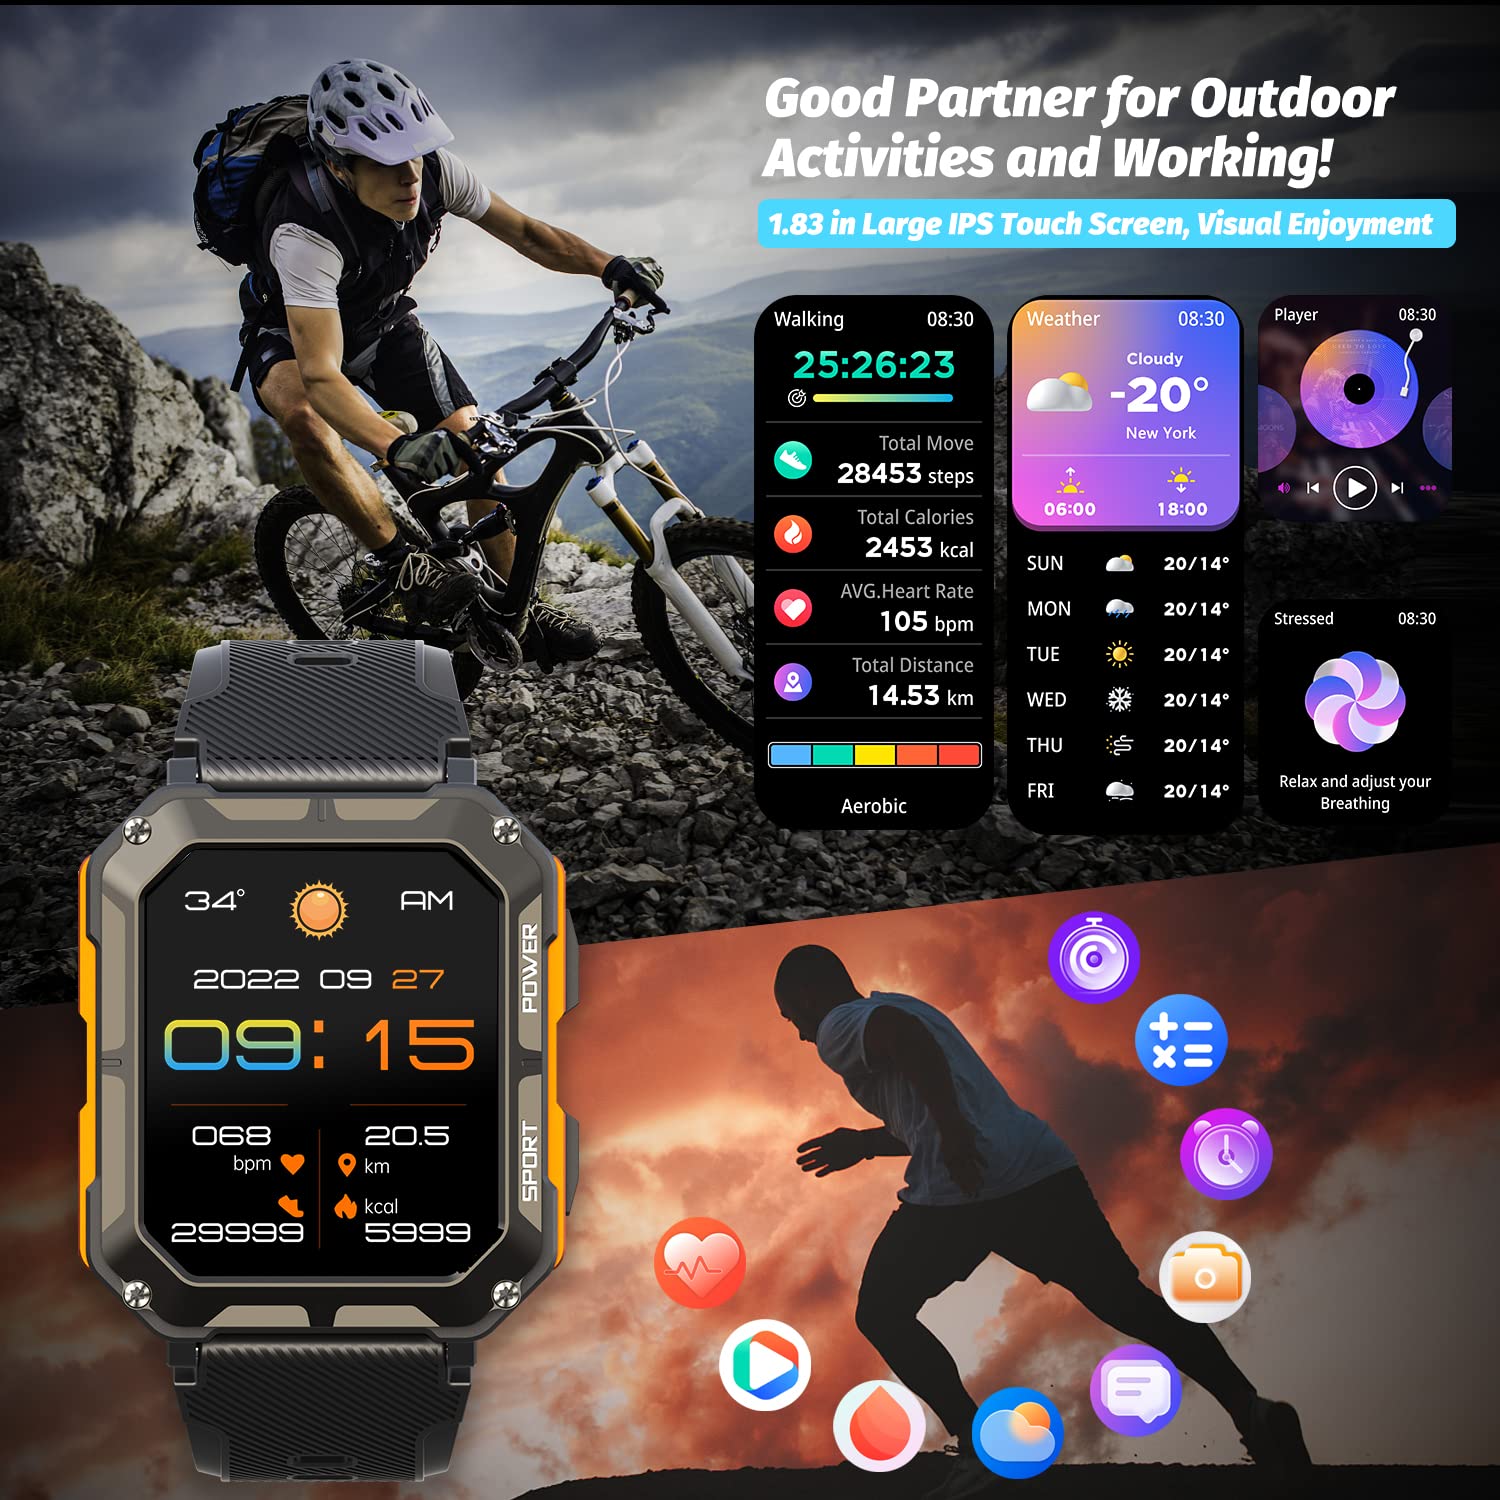 HOFIT Smart Watch for Men, Bluetooth Call(Answer/Make Call) Mens Watches, Military Rugged Smart Watches, 1.83in HD Touch Screen, Fitness Watch for Android iOS, Activities Tracker, Gifts for Men